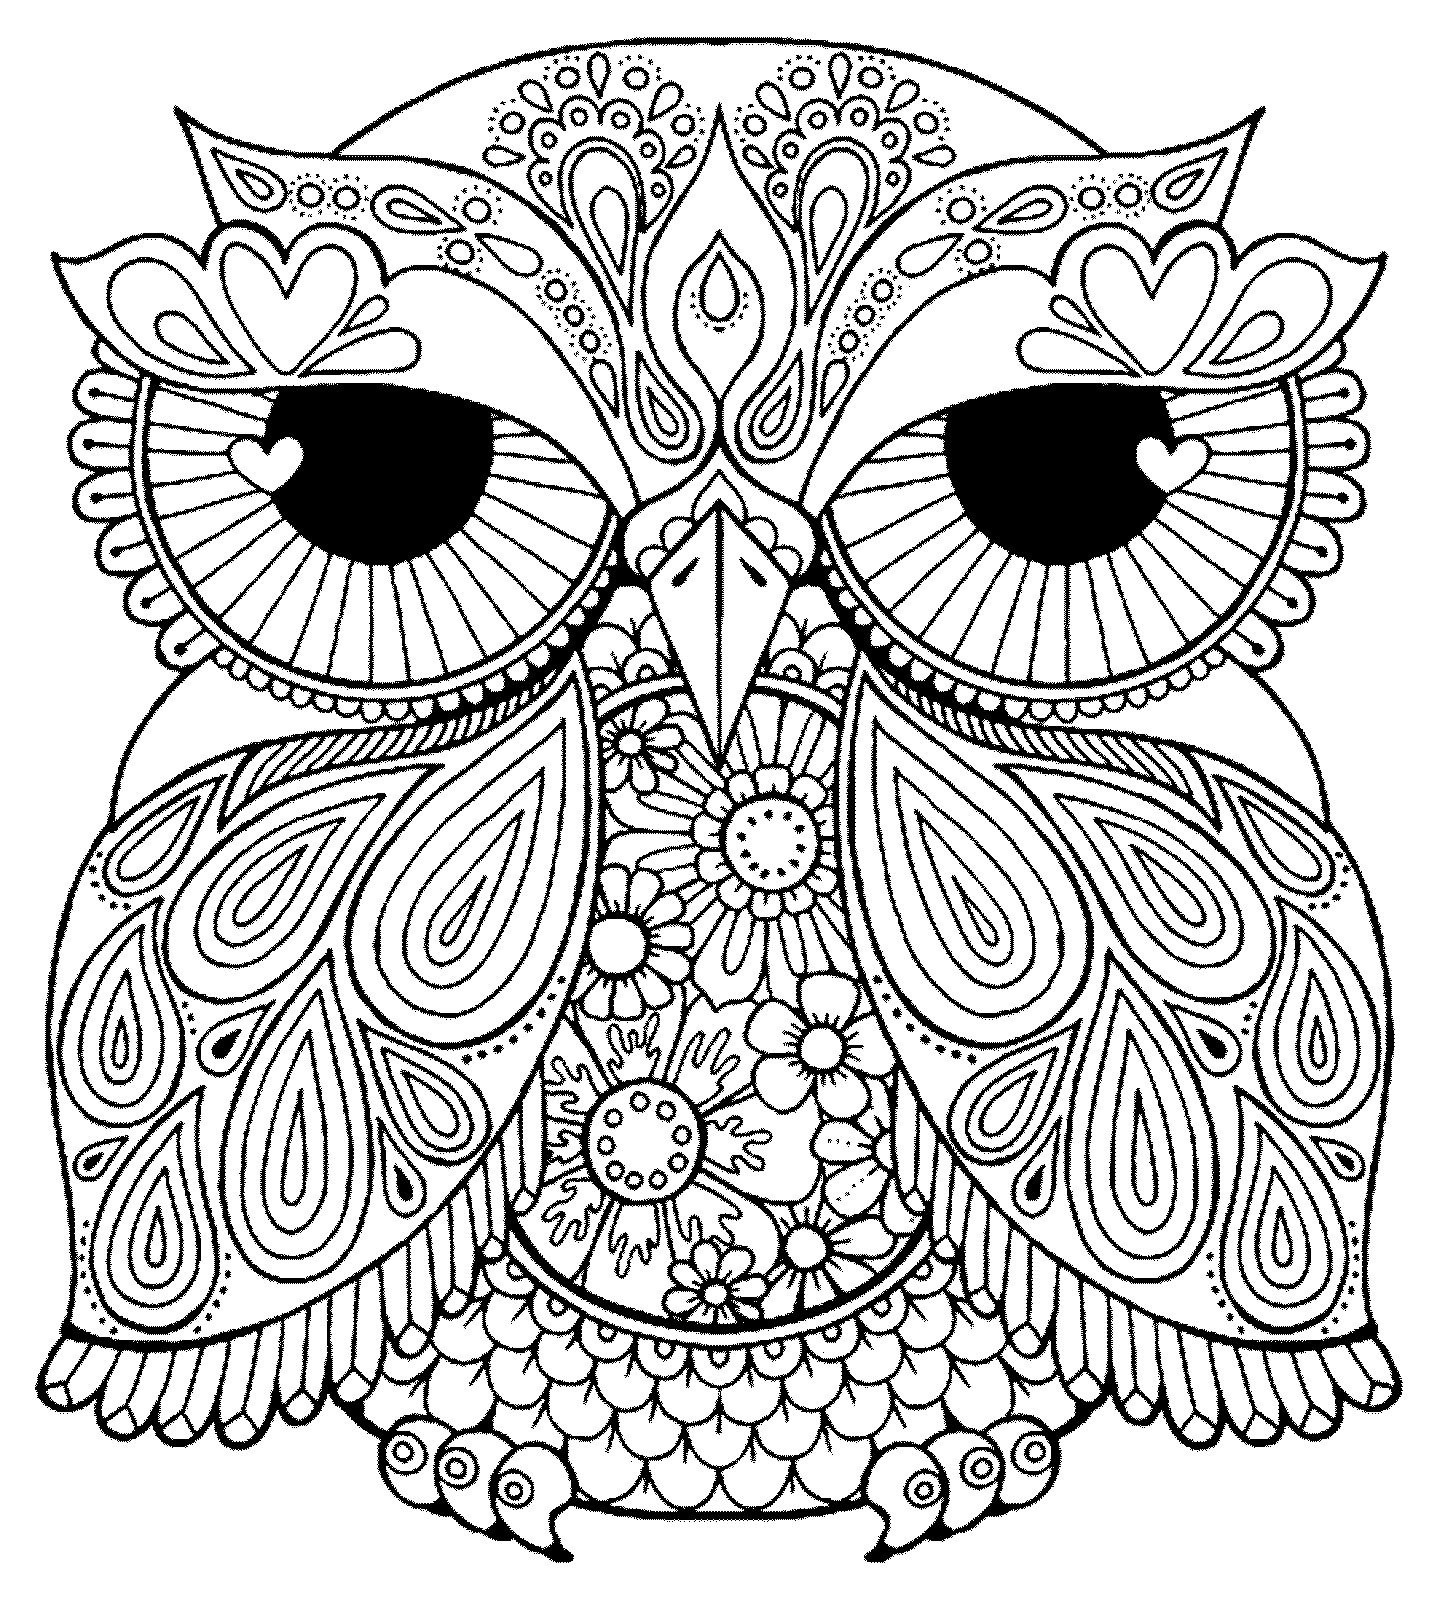 Free Owl Coloring Pages For Adults
 Owl Mandala Coloring Pages Gallery Free Coloring Books